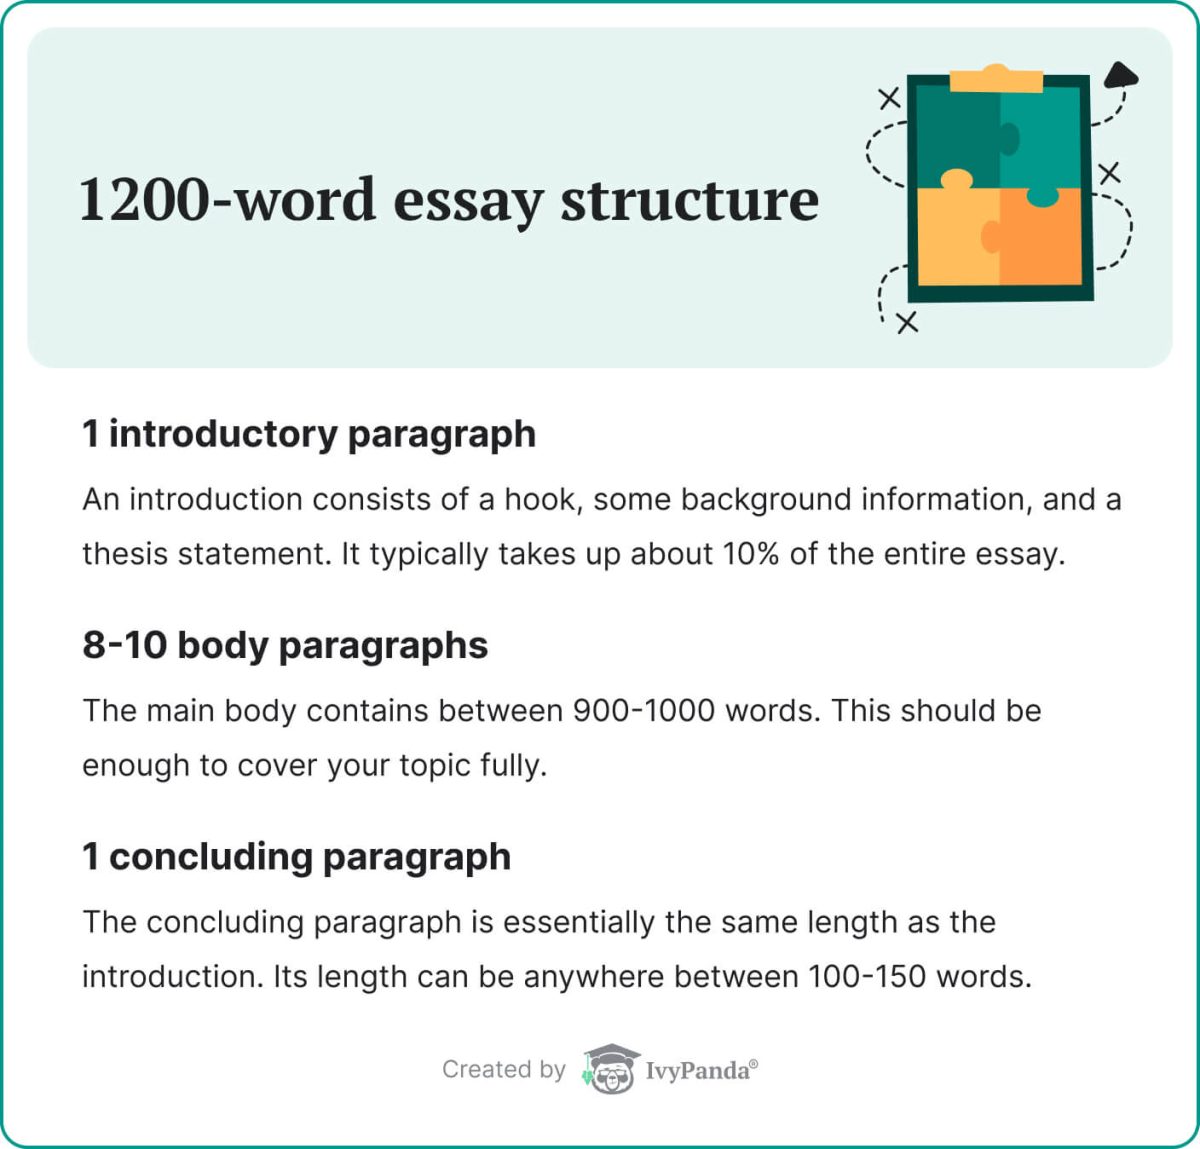 The picture shows 1200-word essay structure.